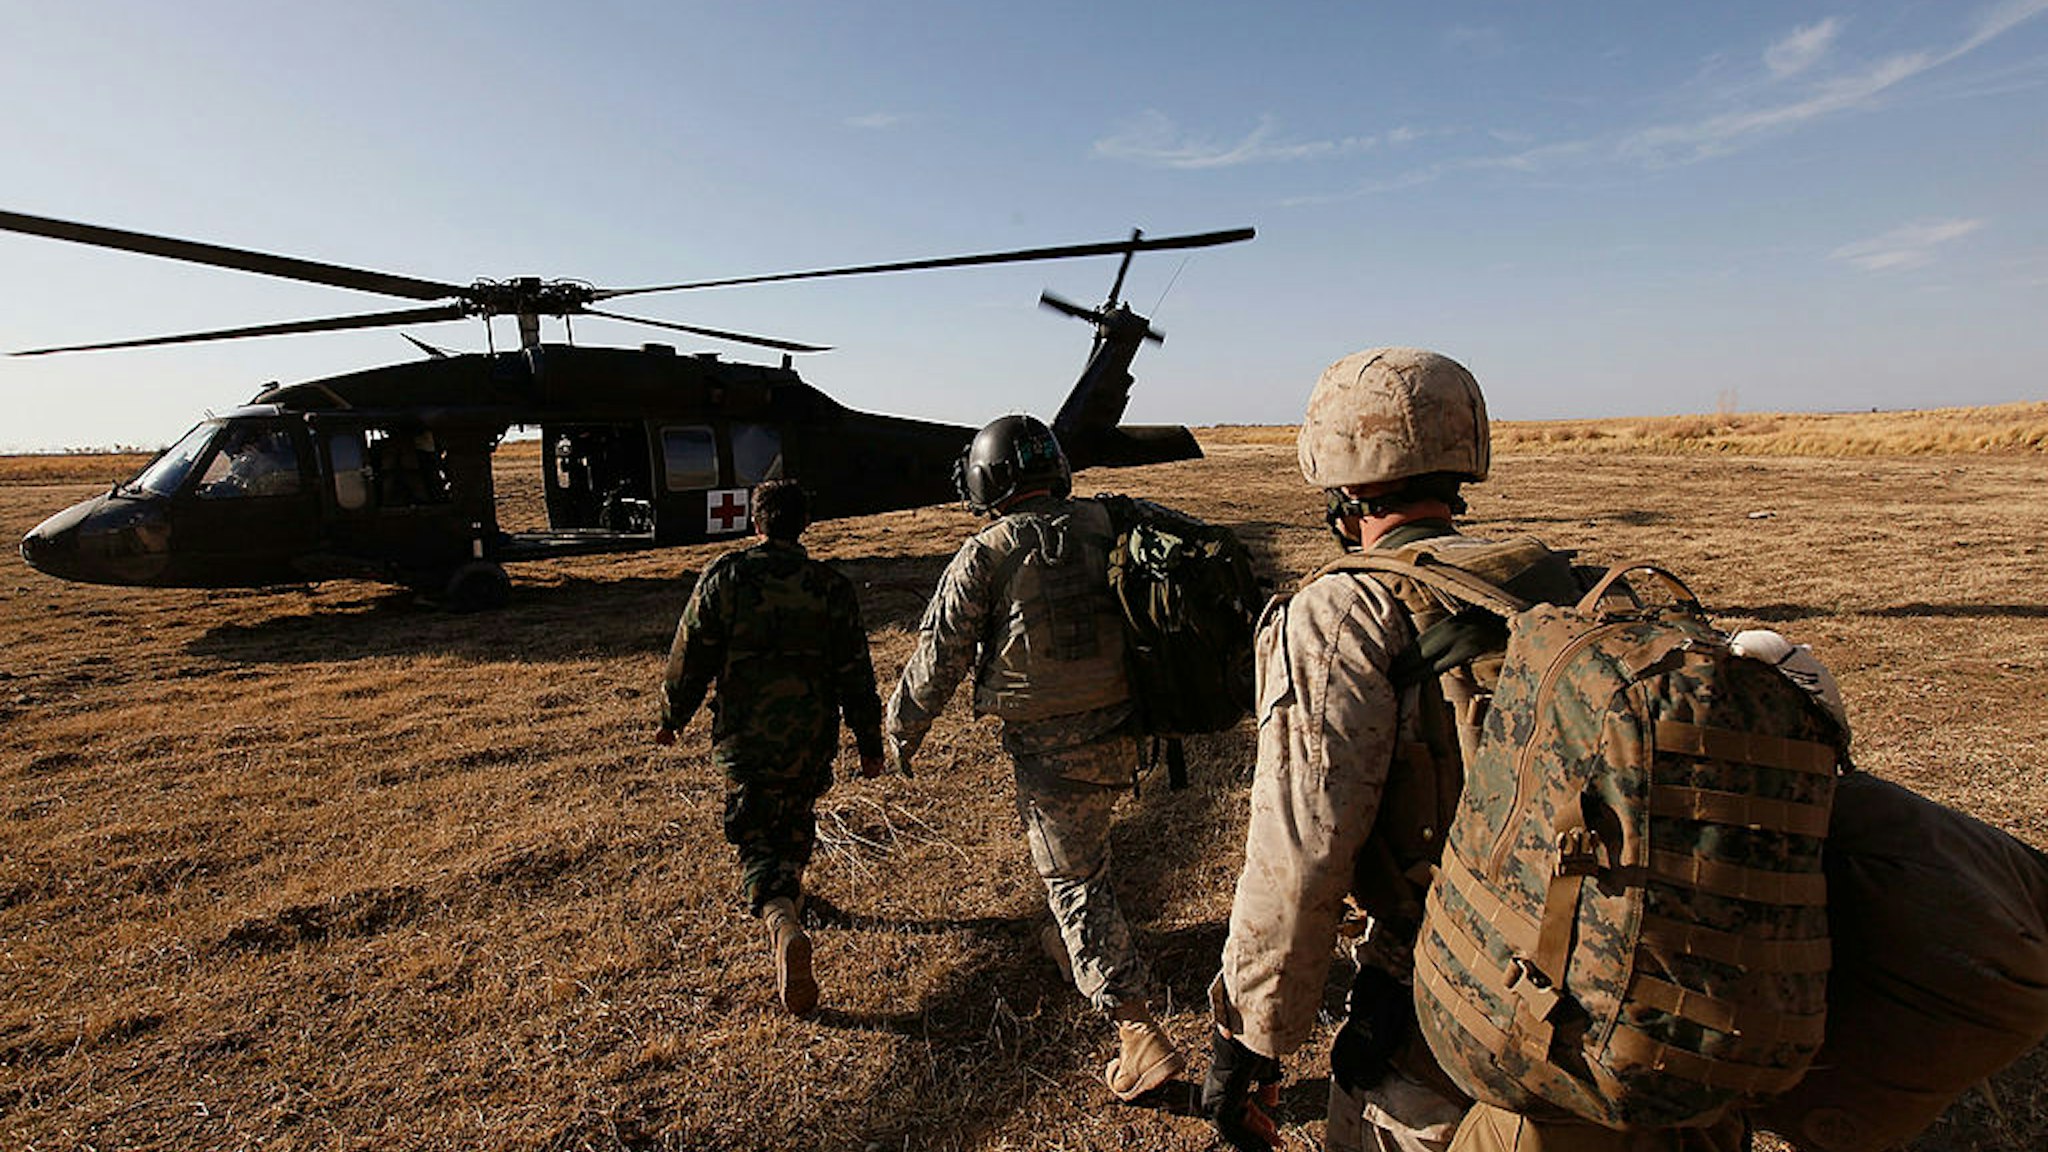 Flight medic Sgt. Aaron Burrows (C) of Amarillo, TX with C Company Dustoff 3rd Battalion of the 82nd Combat Aviation Brigade 82nd Airborne Division leads a U.S. Marine (R) and a soldier with the Afghan National Army to a MEDEVAC helicopter December 20, 2009 near Delhi, Afghanistan.